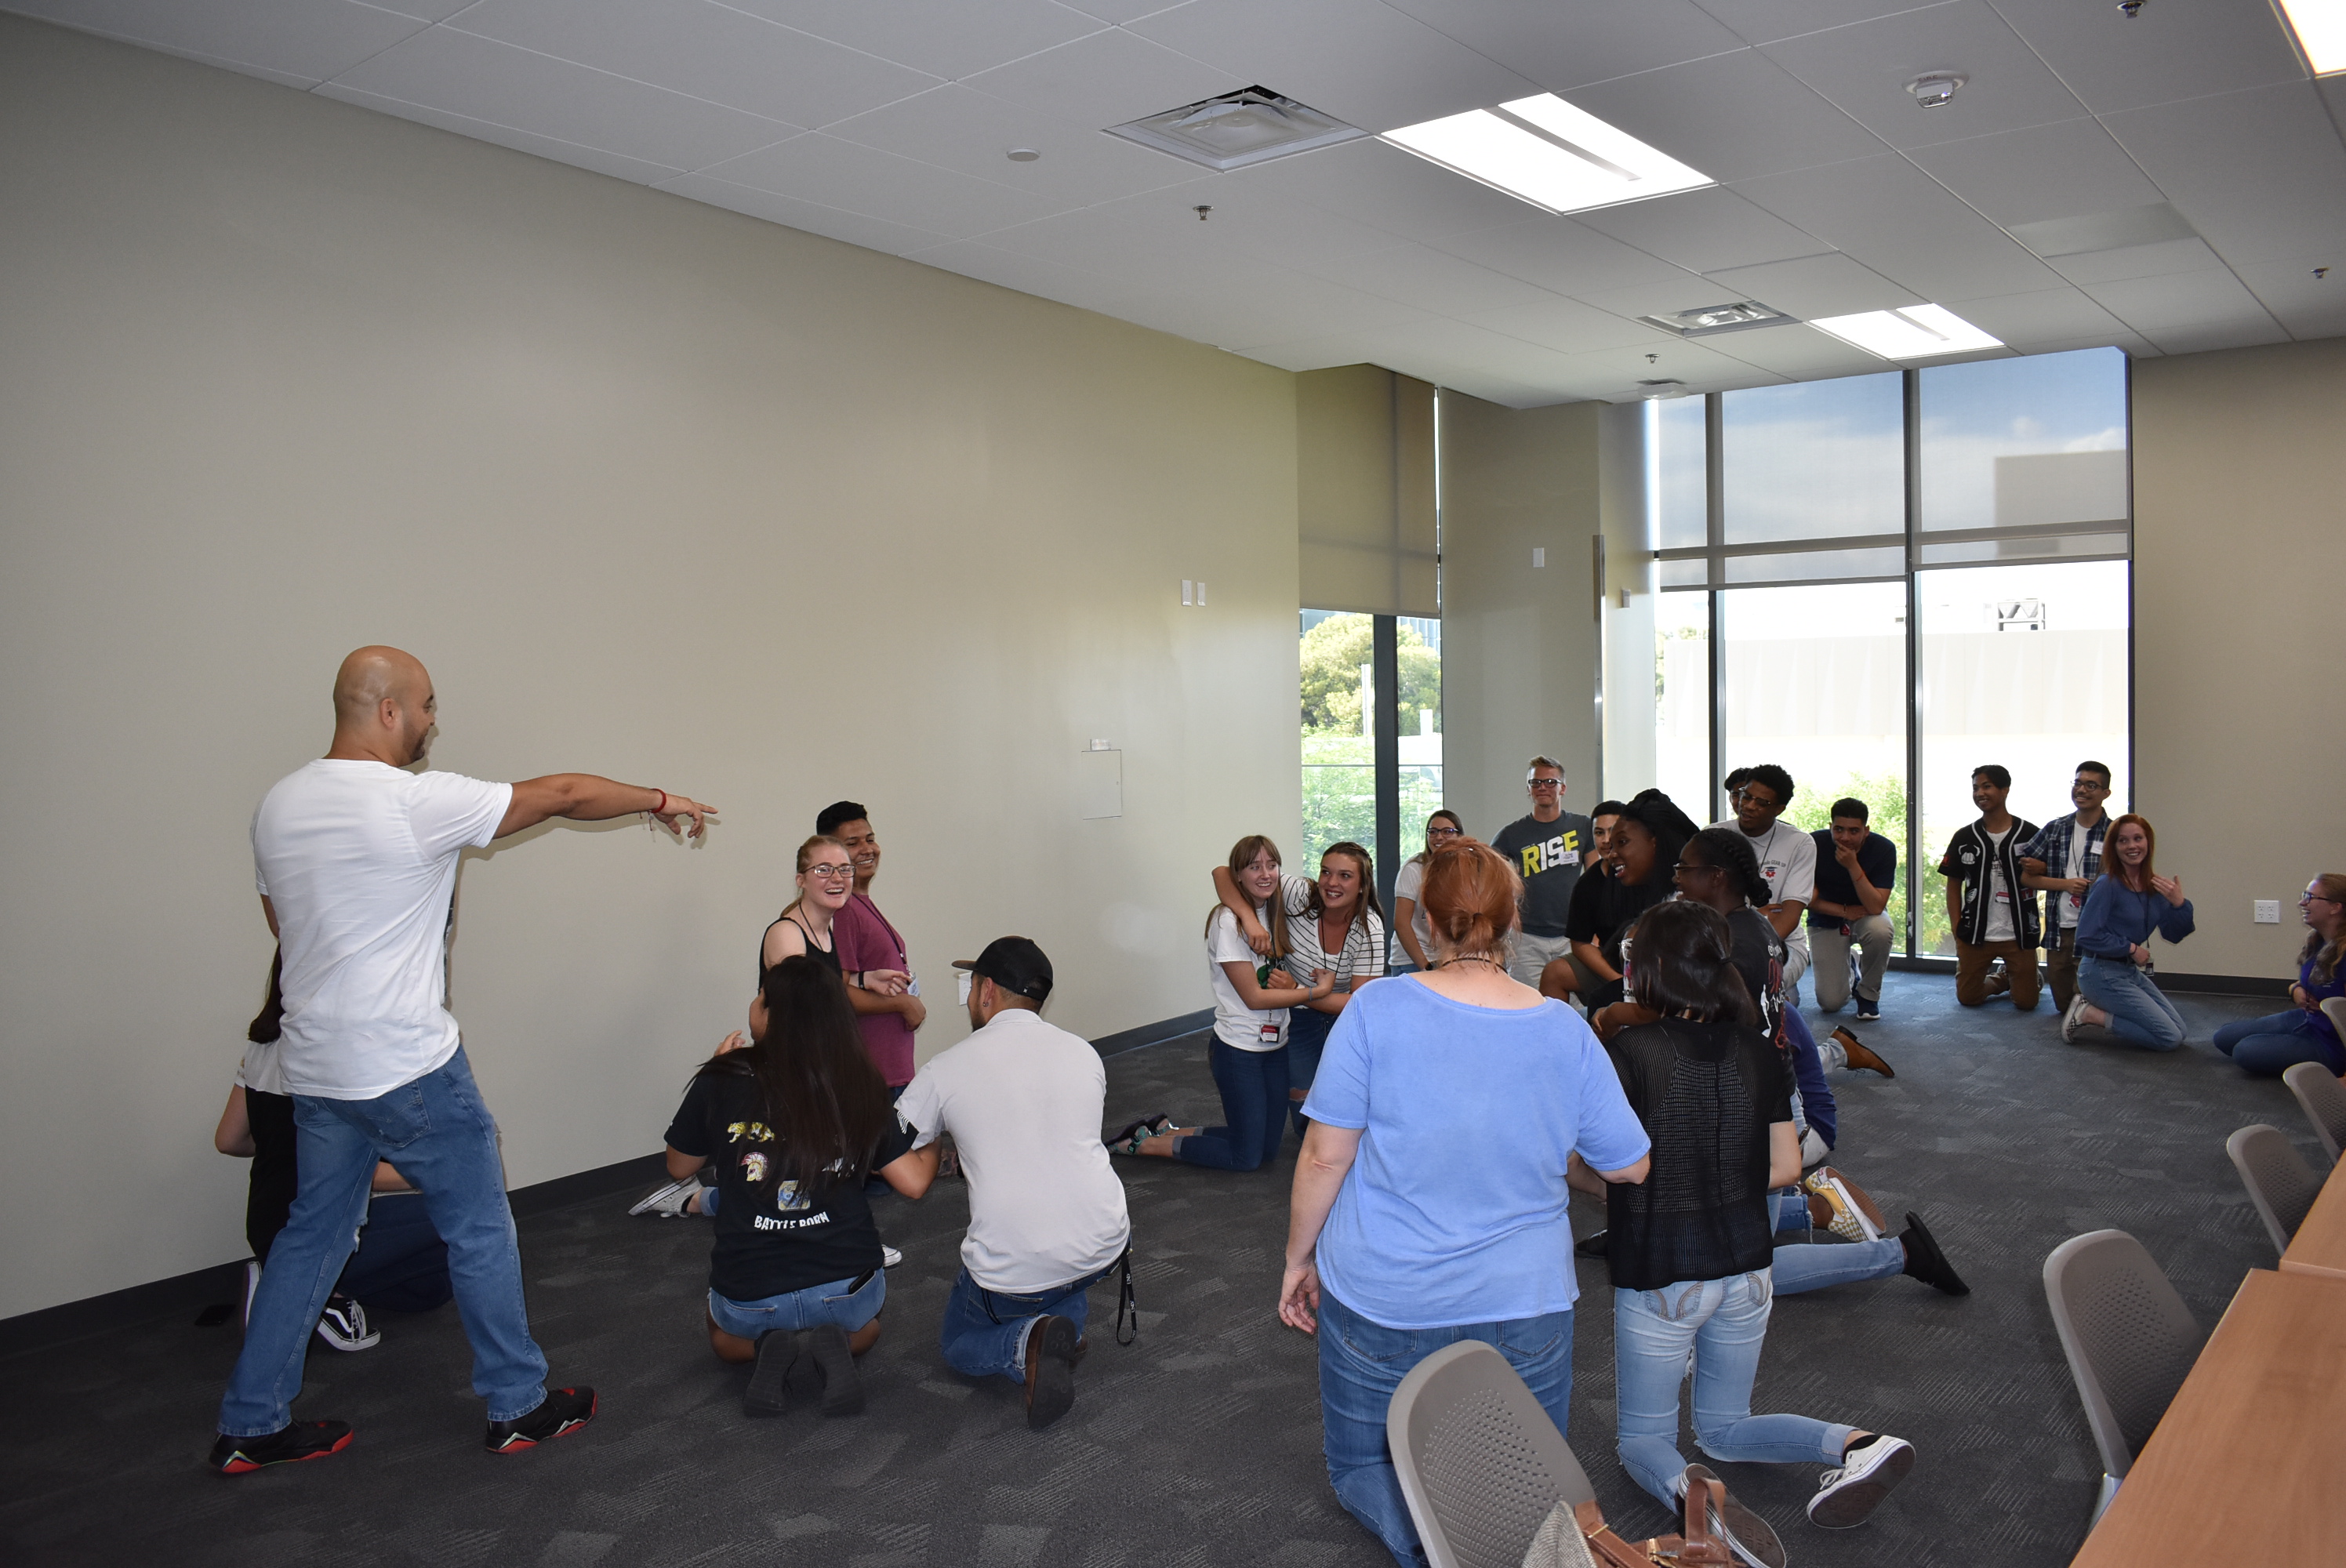 A large group of young people kneel on a classroom floor engaged in a type of teambuilding exercise. A man in a white shirt with his back to the camera appears to be leading the group through the activity.